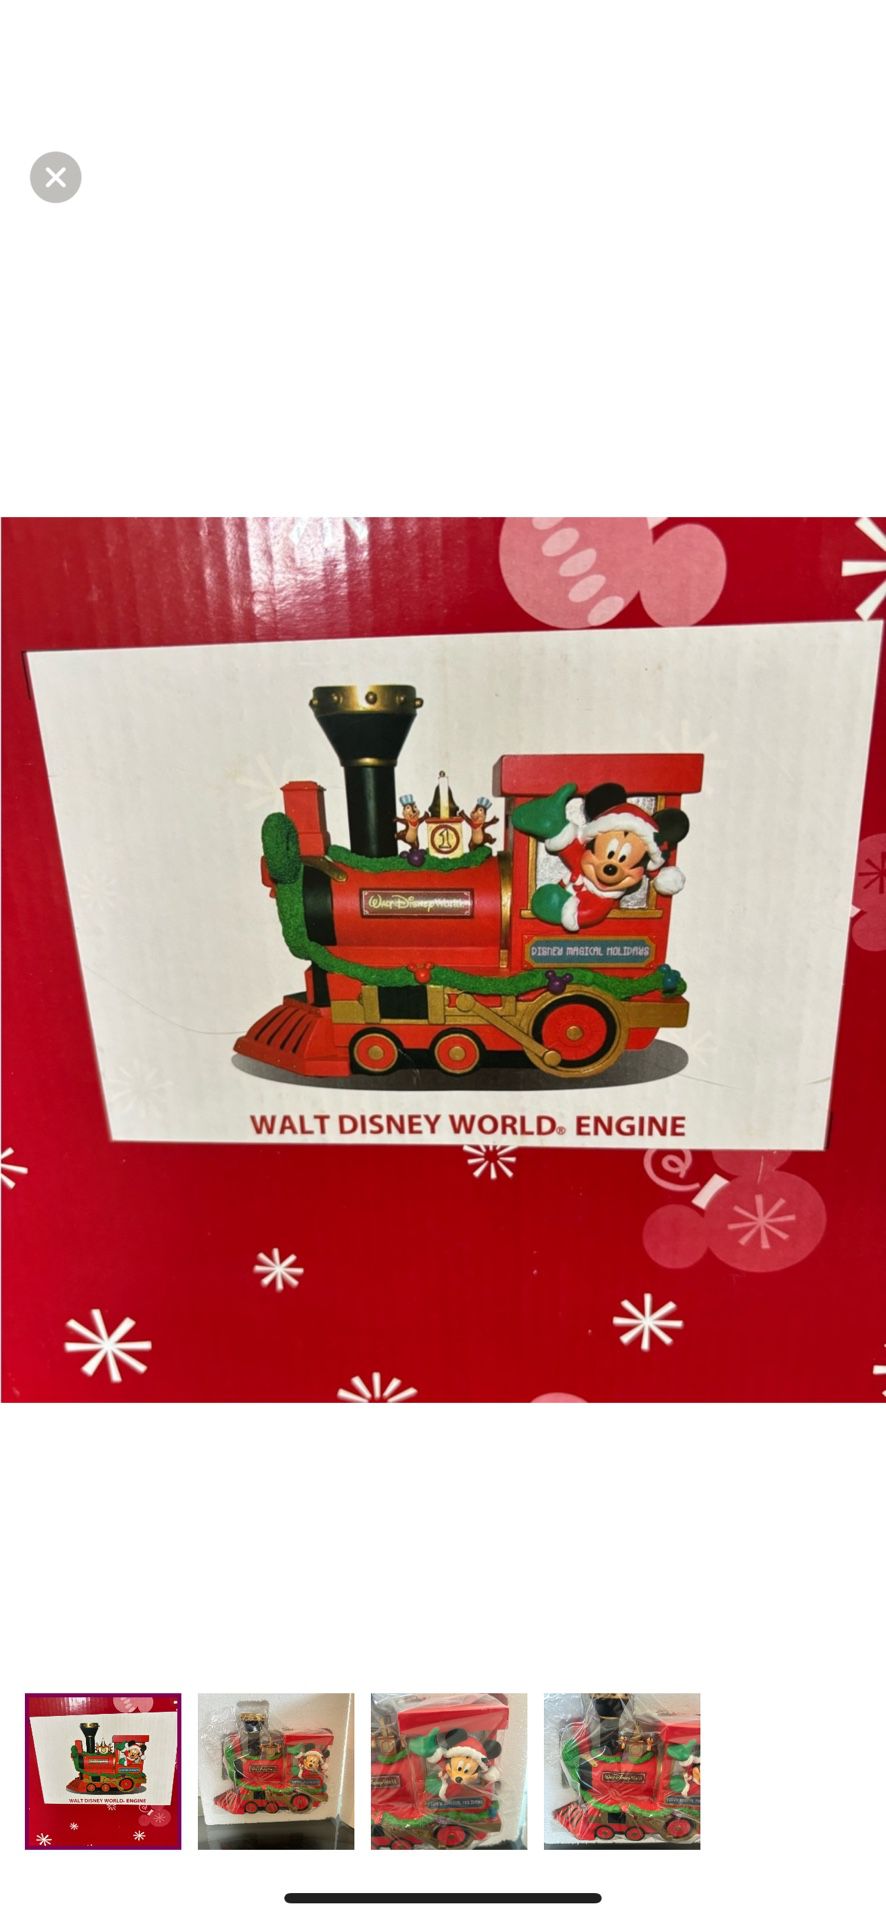 2008 Walt Disney world engine from the Disney collection